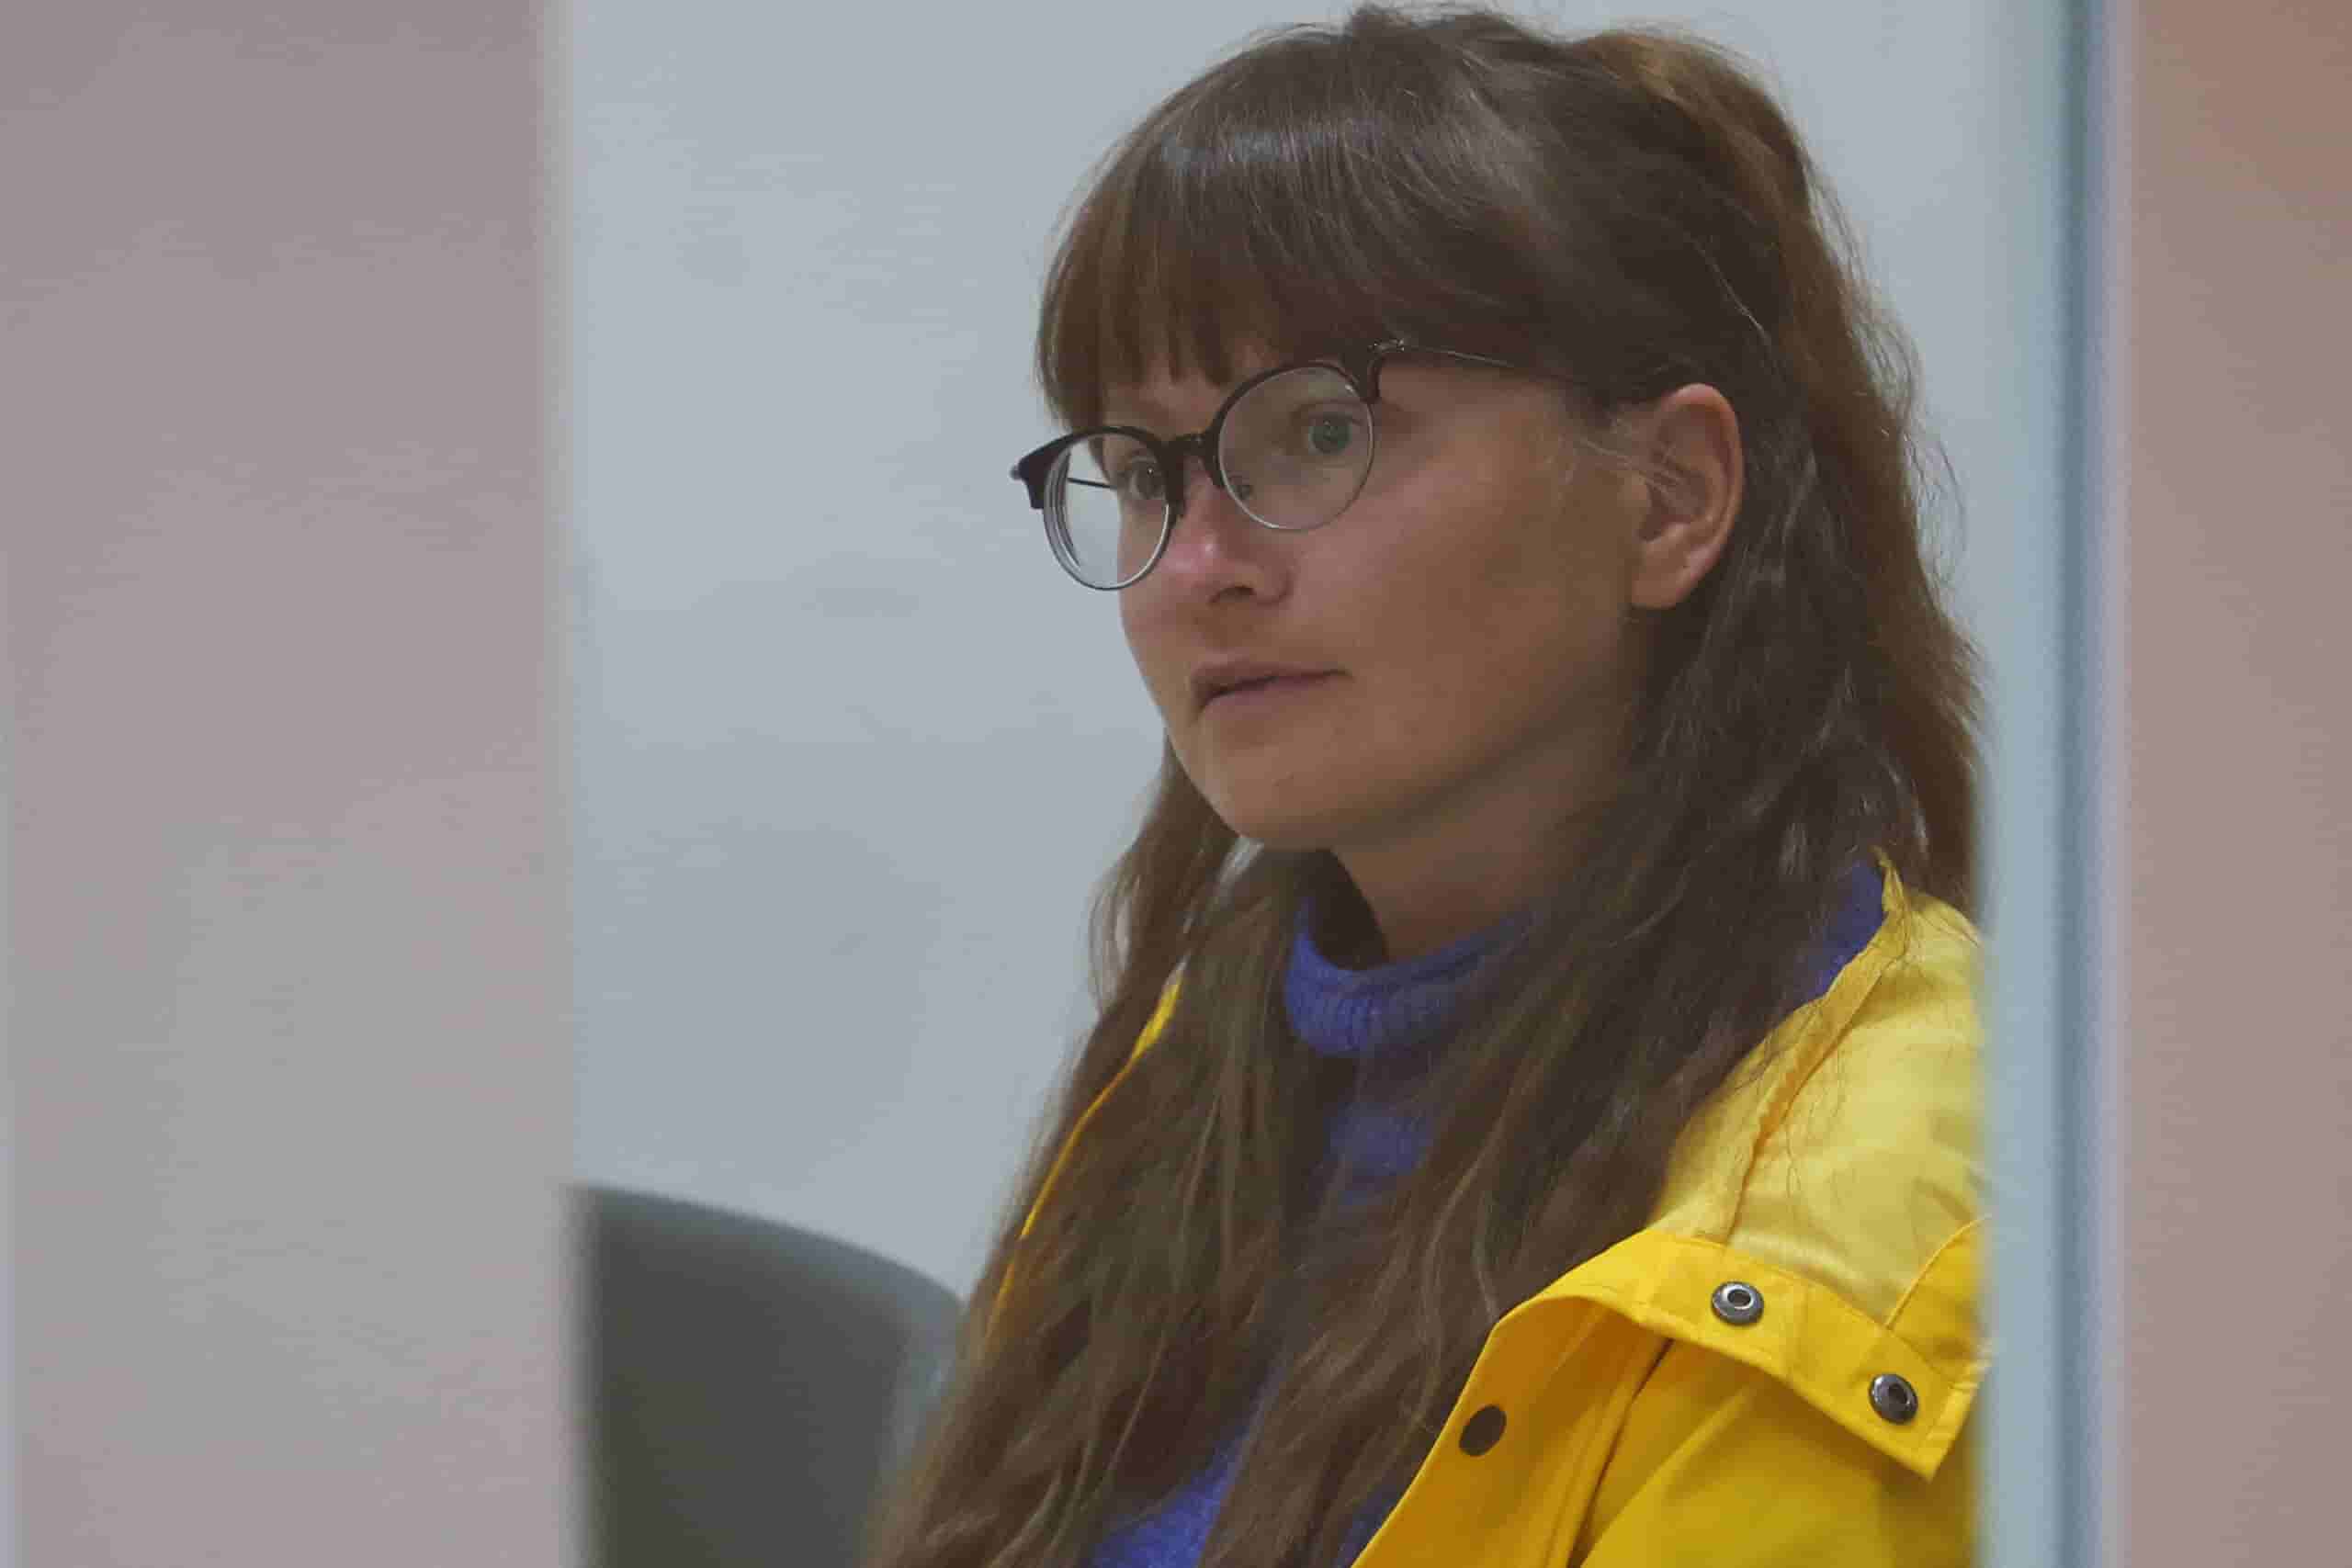 Albanian court refused to extradite 34-year-old Svetlana Timofeeva, a Russian self-proclaimed blogger who was arrested last August after filming an abandoned military base. She also faces similar charges in Moscow.